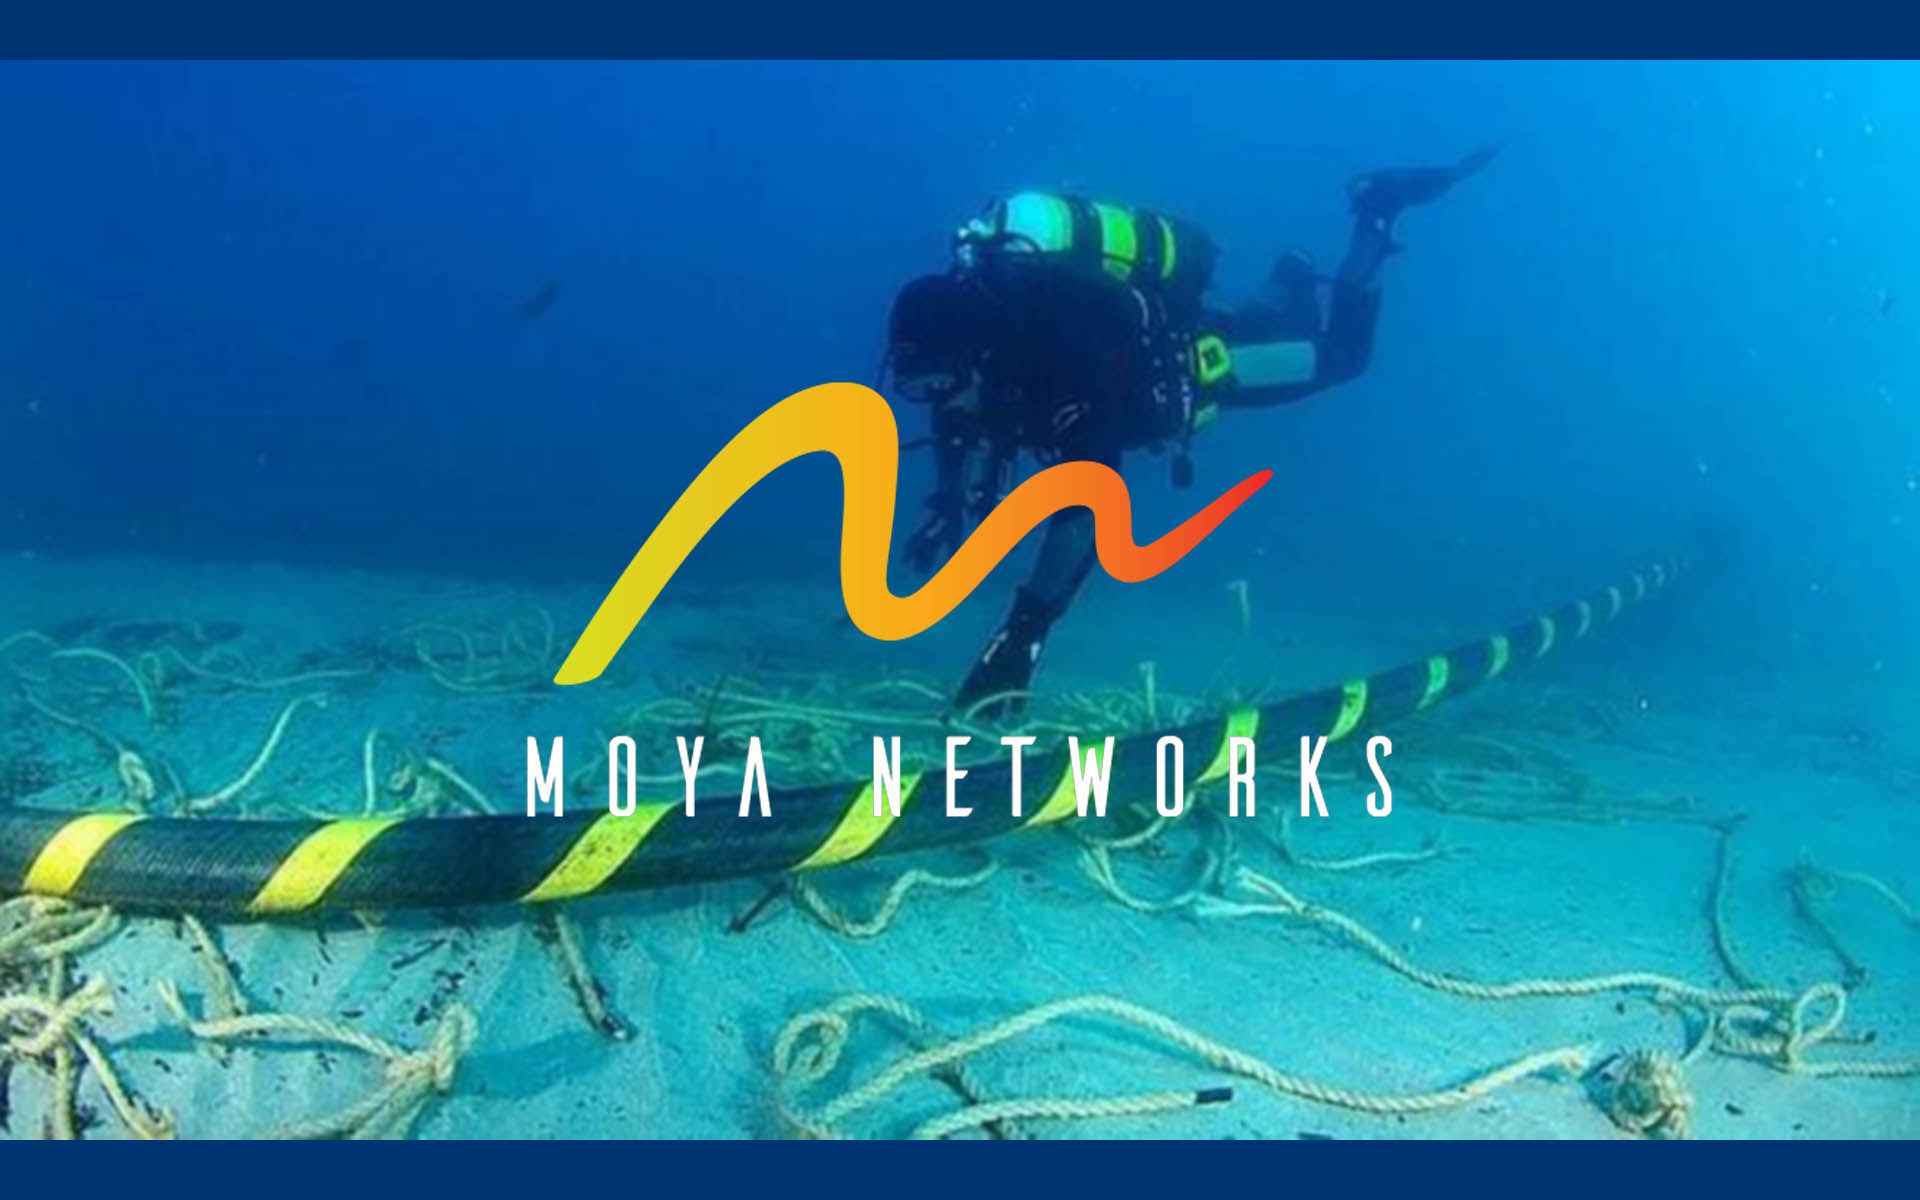 Moya Networks - Africa’s Underwater Internet Cable Revolution in the Works via Blockchain?